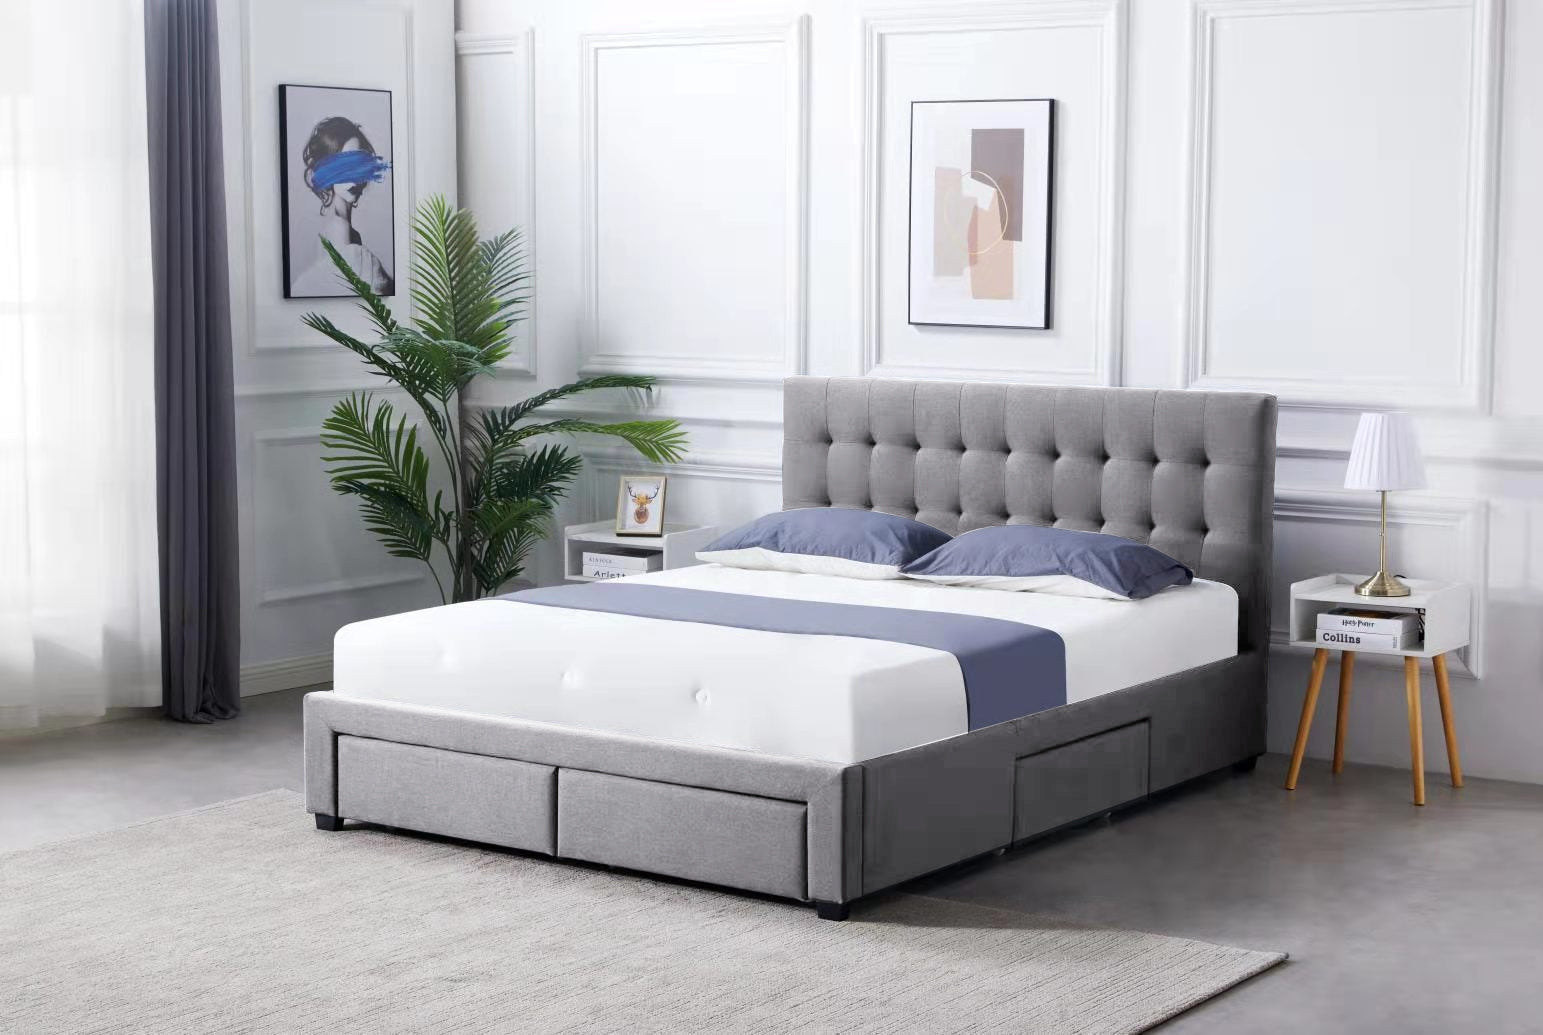 Fabric Square Tufted Storag Bed Frame Queen Full Size with 4 Drawers Grey